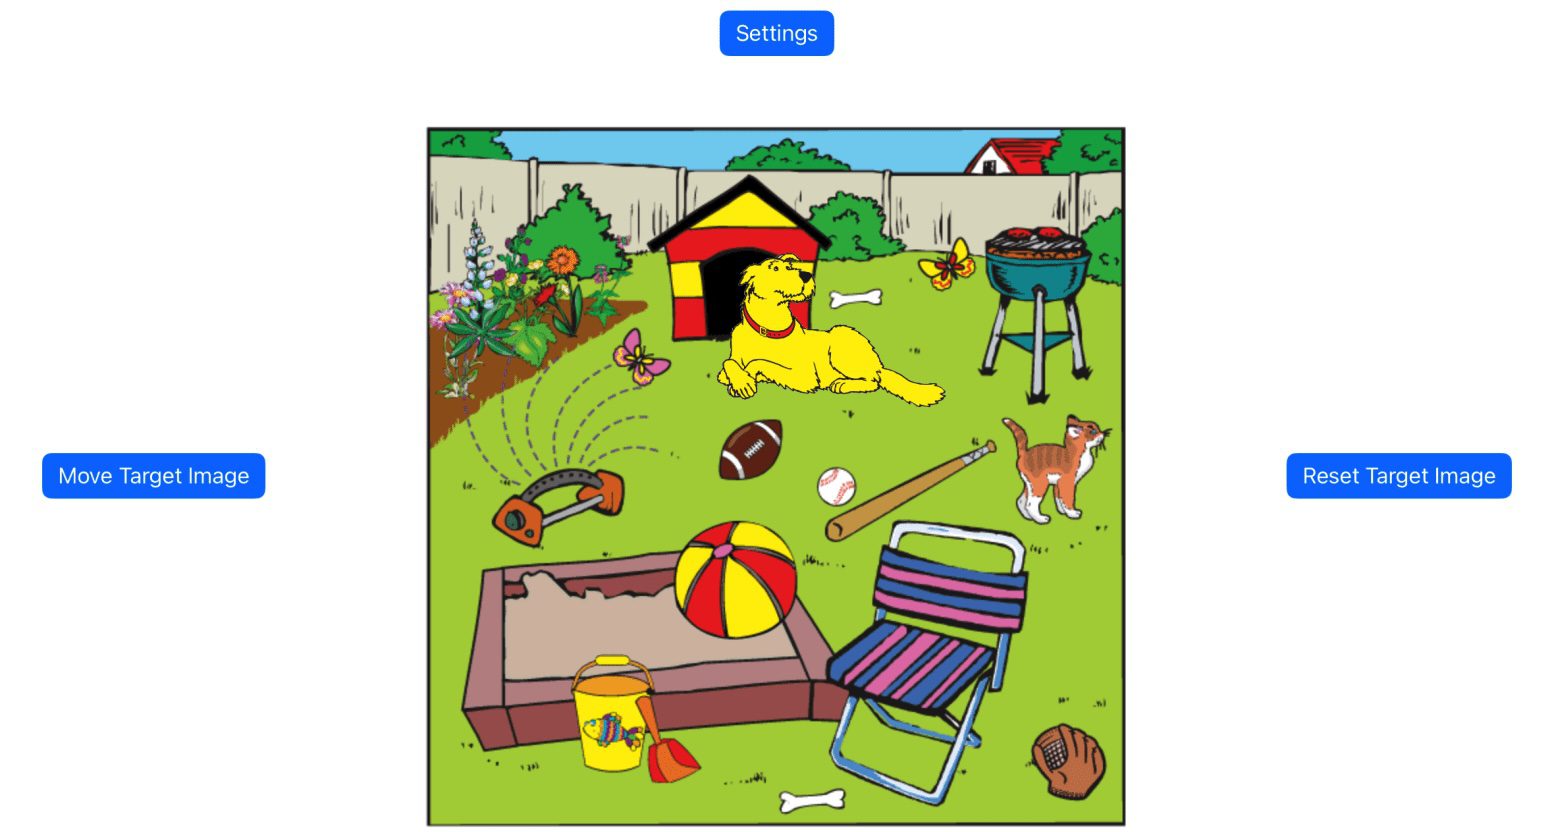 Screenshot of a yellow dog, a dog house, several plants, and a variety of other outdoor items positioned around one of the background scenes, a grassy backyard with a beige fence. Above the scene is a blue Settings button. To the left is a blue button that says "Move Target Image;" and one on the right that says "Reset Target Image."